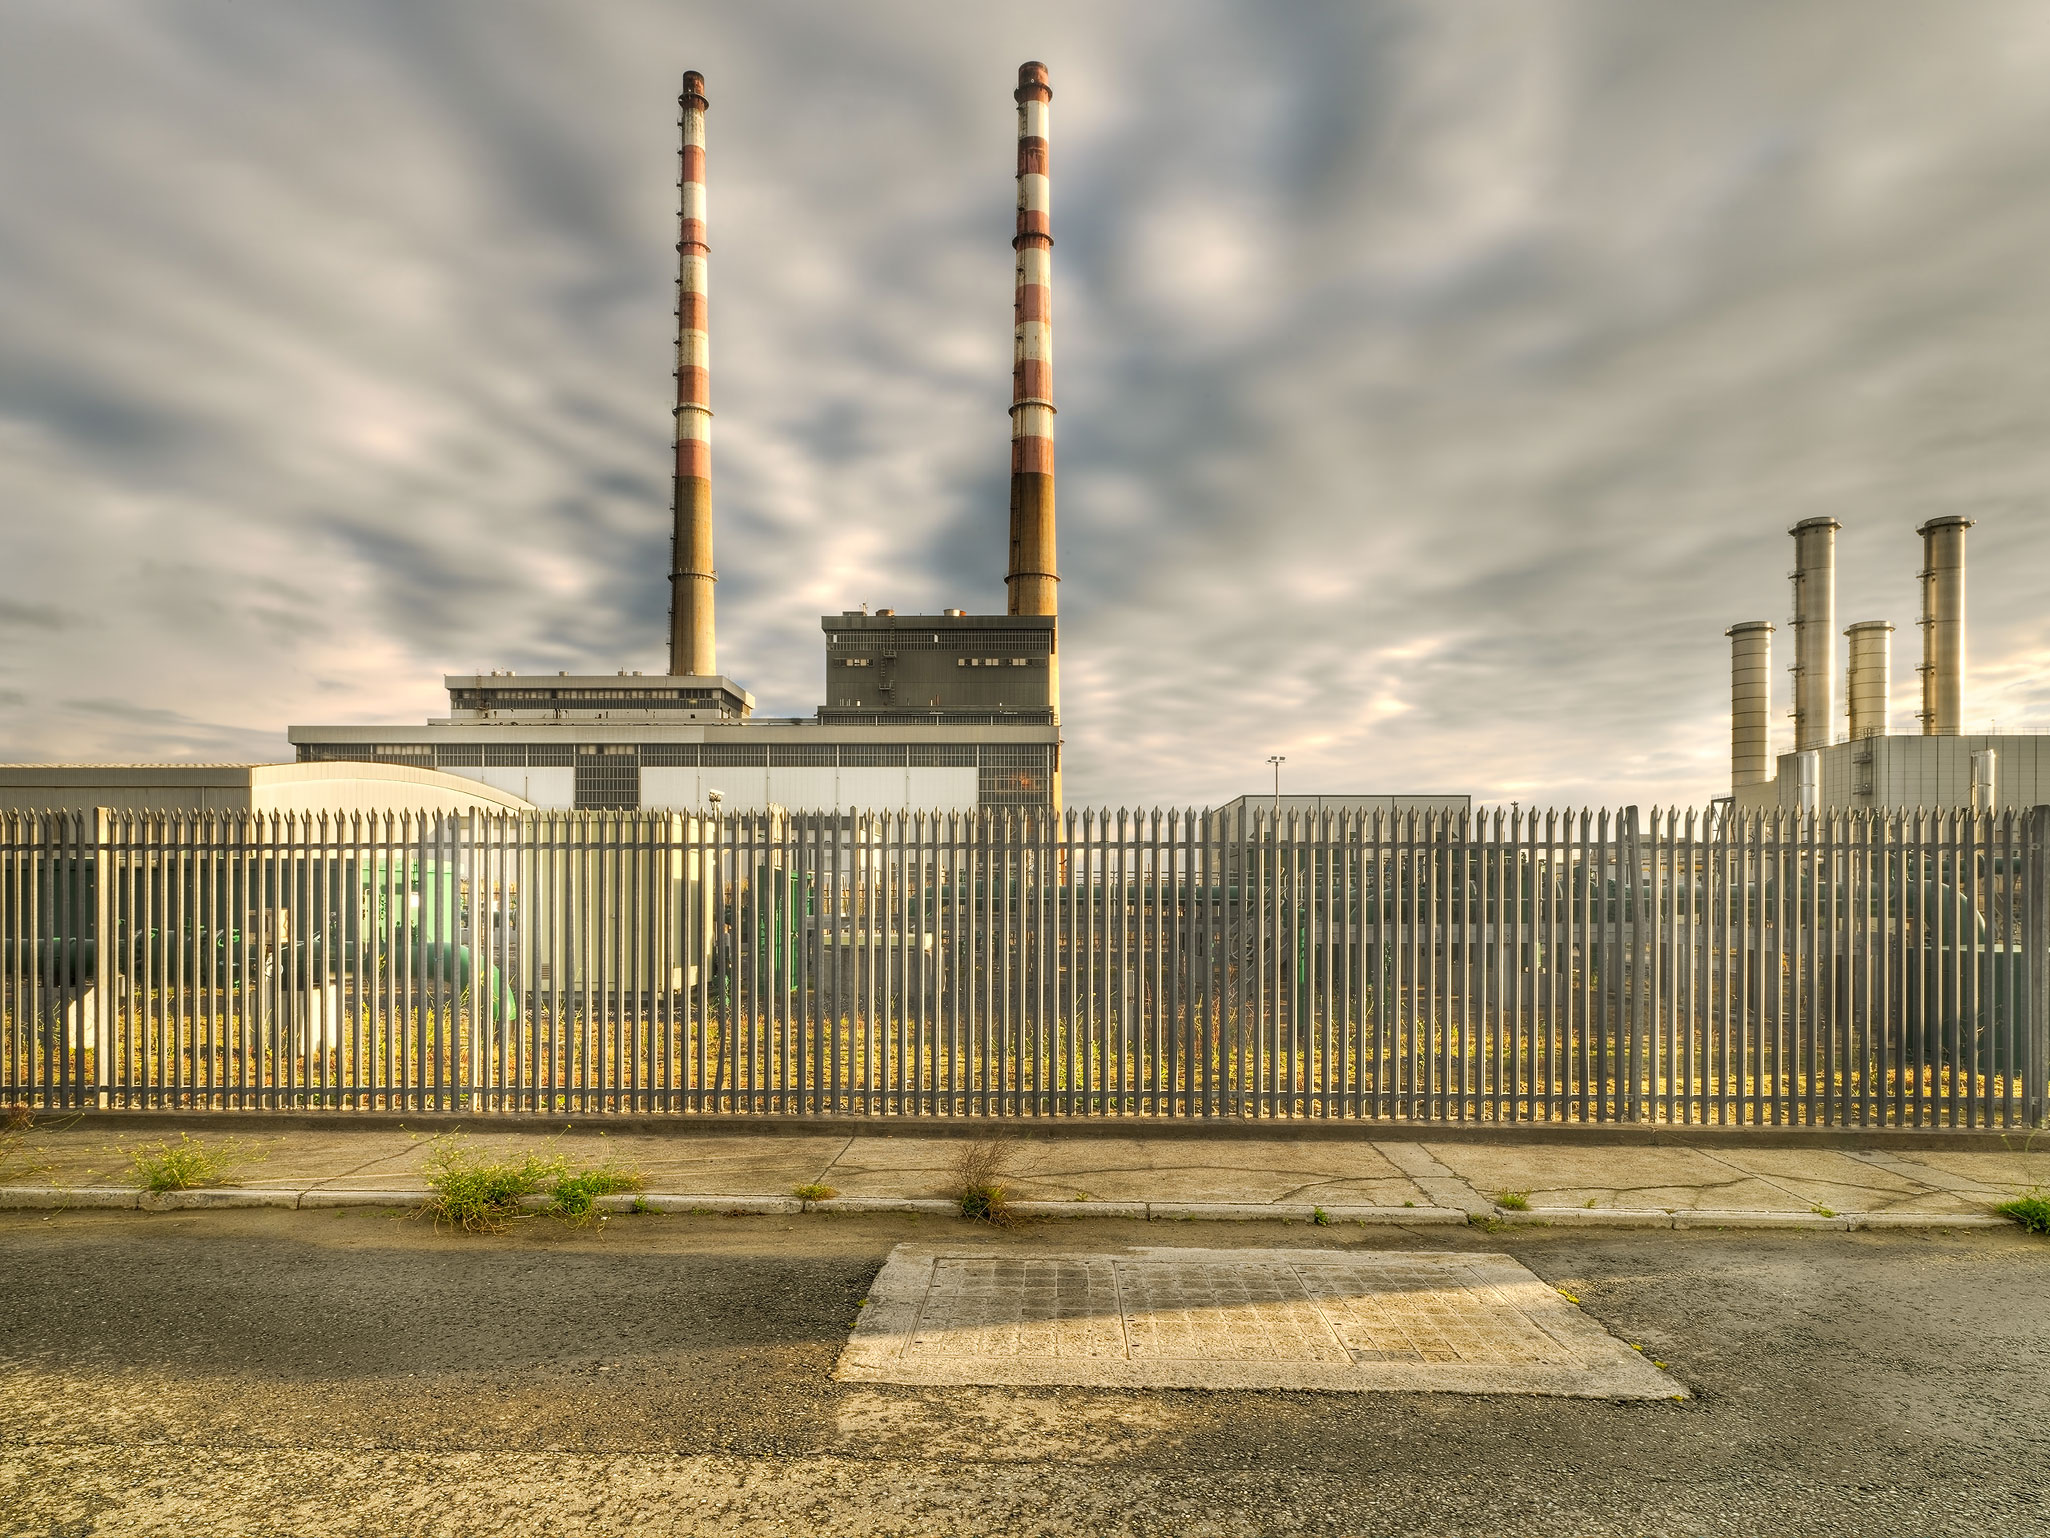 Poolbeg Power Station industrial fine art photo fine art architectural photography